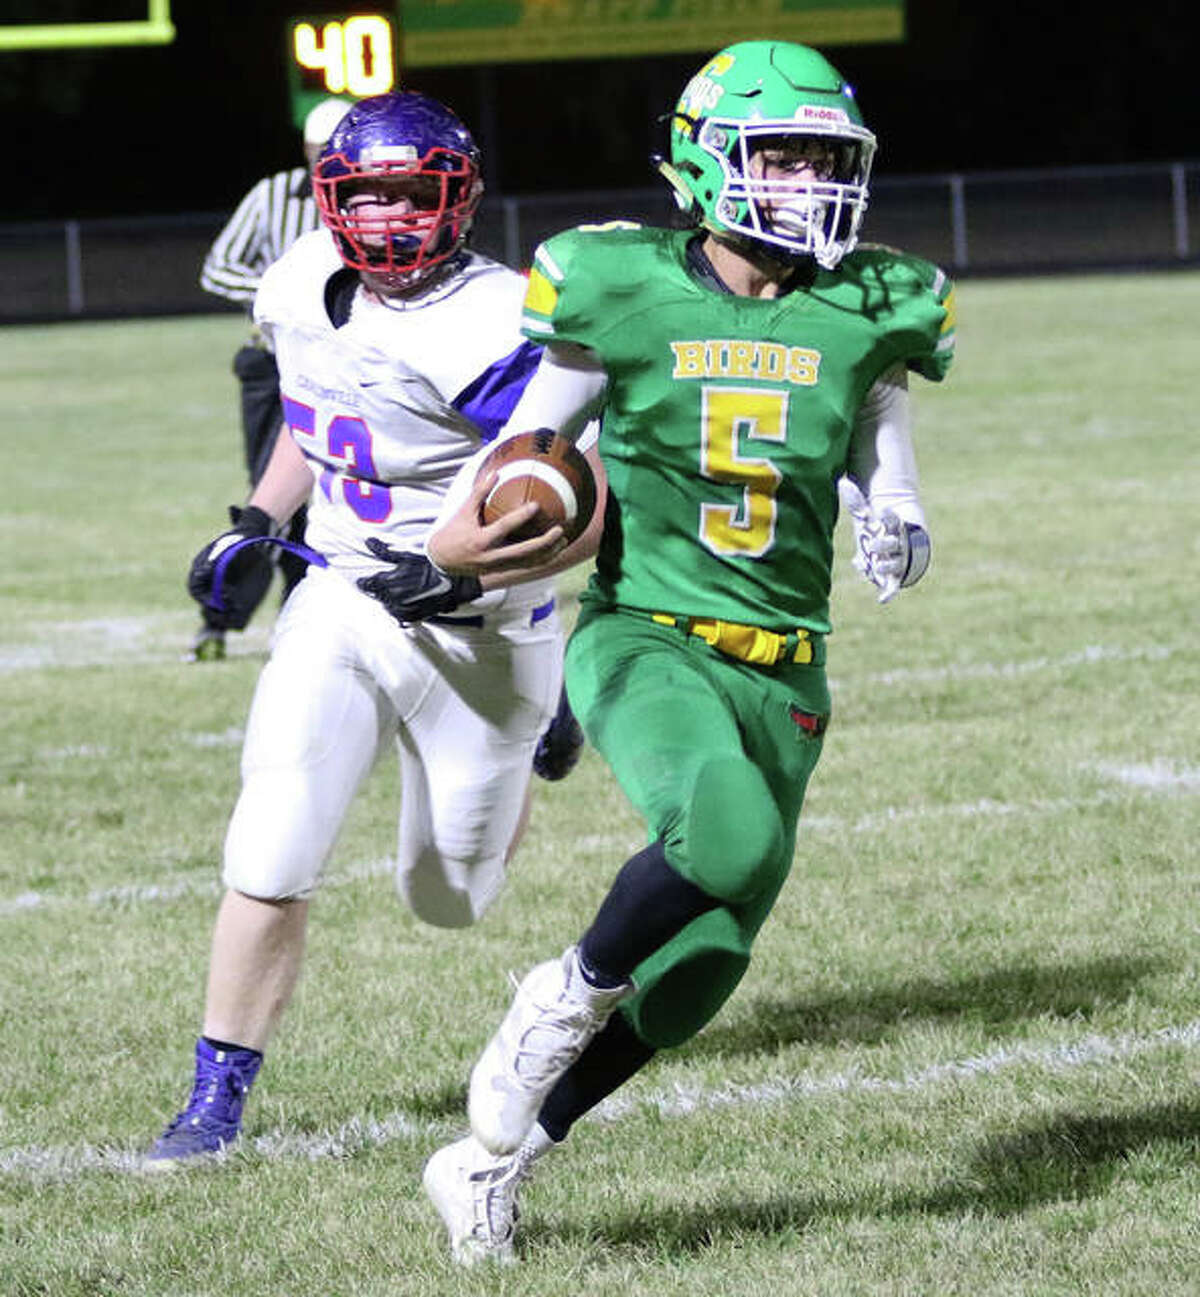 Southwestern’s Gavin Day (5) heads upfield after getting around Carlinville’s Tyler Reels in the first half Friday night at Knapp Field in Piasa.